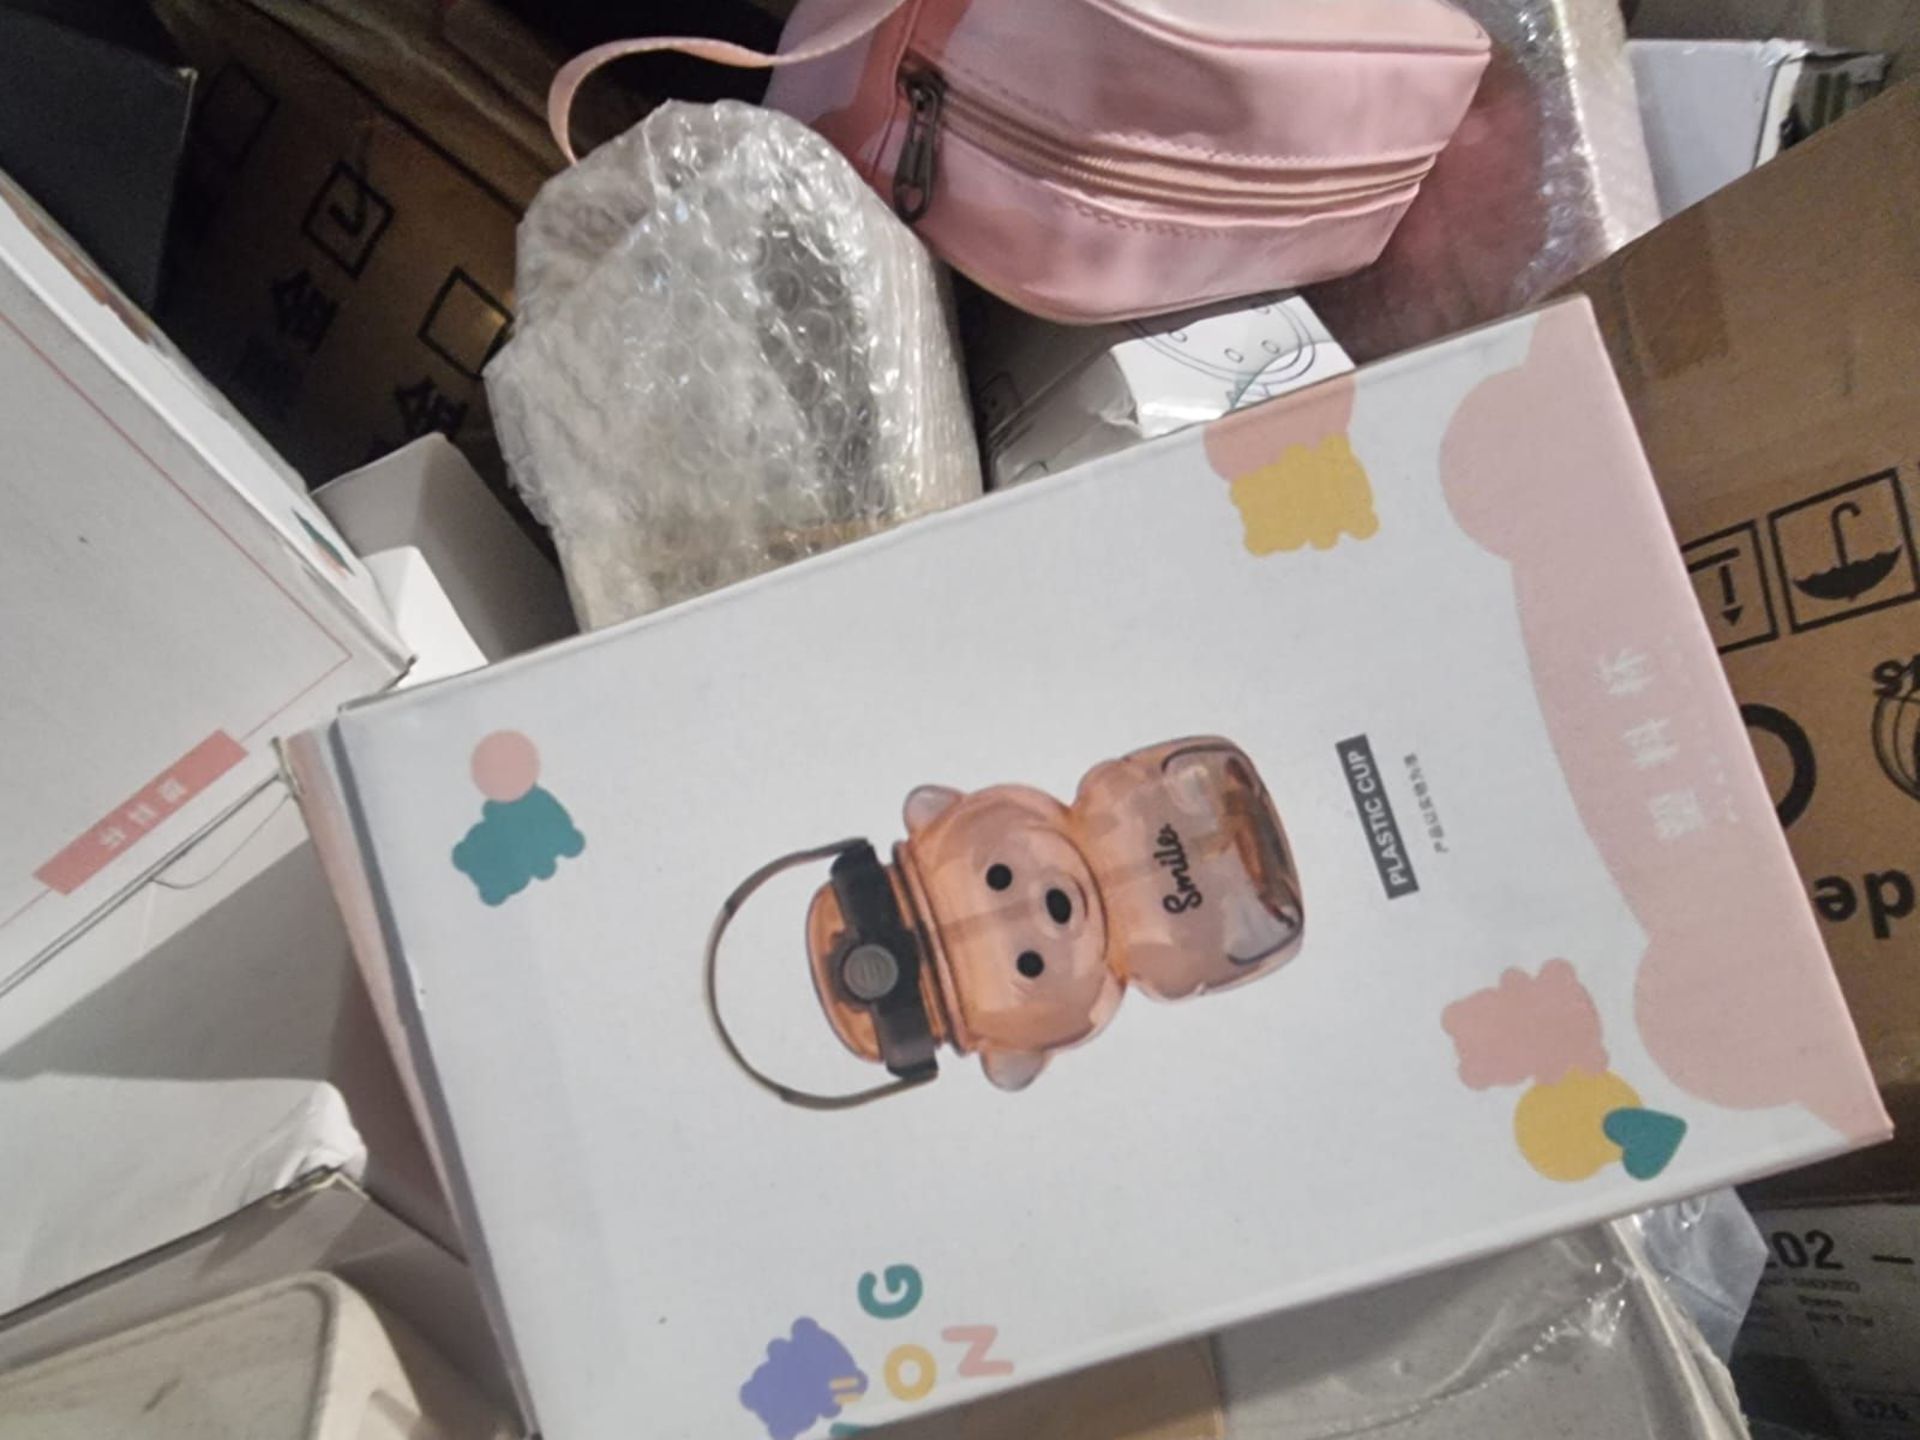 TRADE LOT 100 x ASSORTED UNCHECKED RETURNS/UNDELIVERED ITEMS FROM TIKTOK - MAY INCLUDE ITEMS SUCH